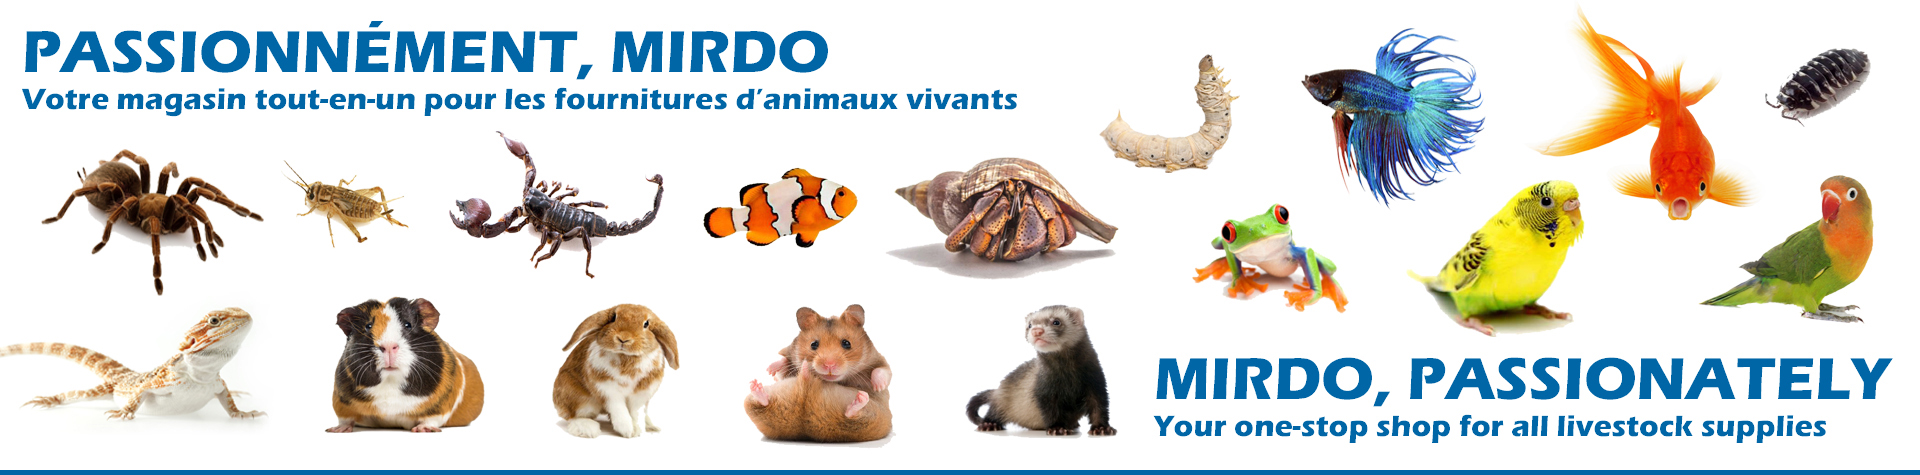 MIRDO, PASSIONATELY - Your One-Stop Shop for All Livestock Supplies